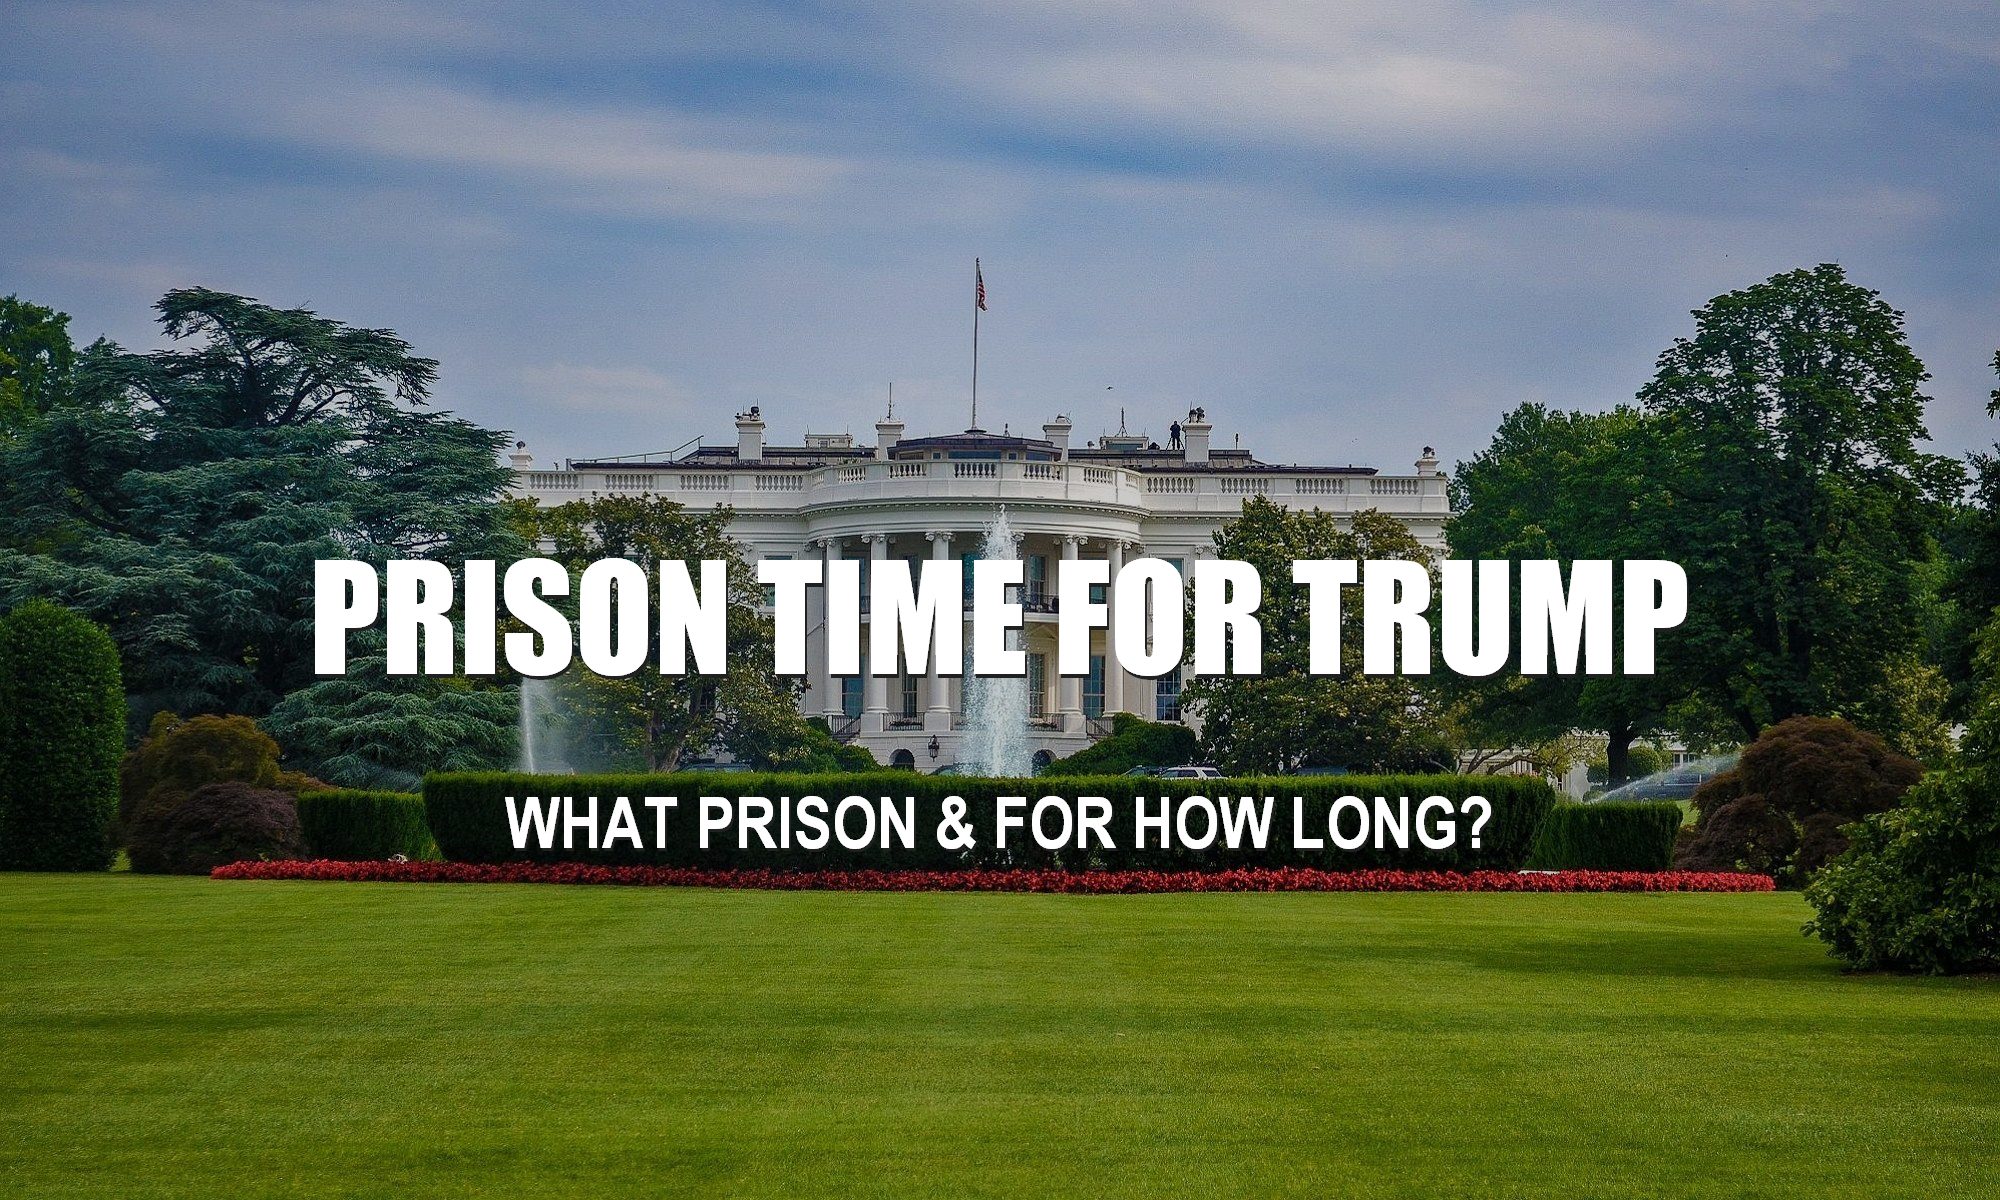 What Prison or Jail Will Trump Go To? How Long Will Trump Be Locked Up? List